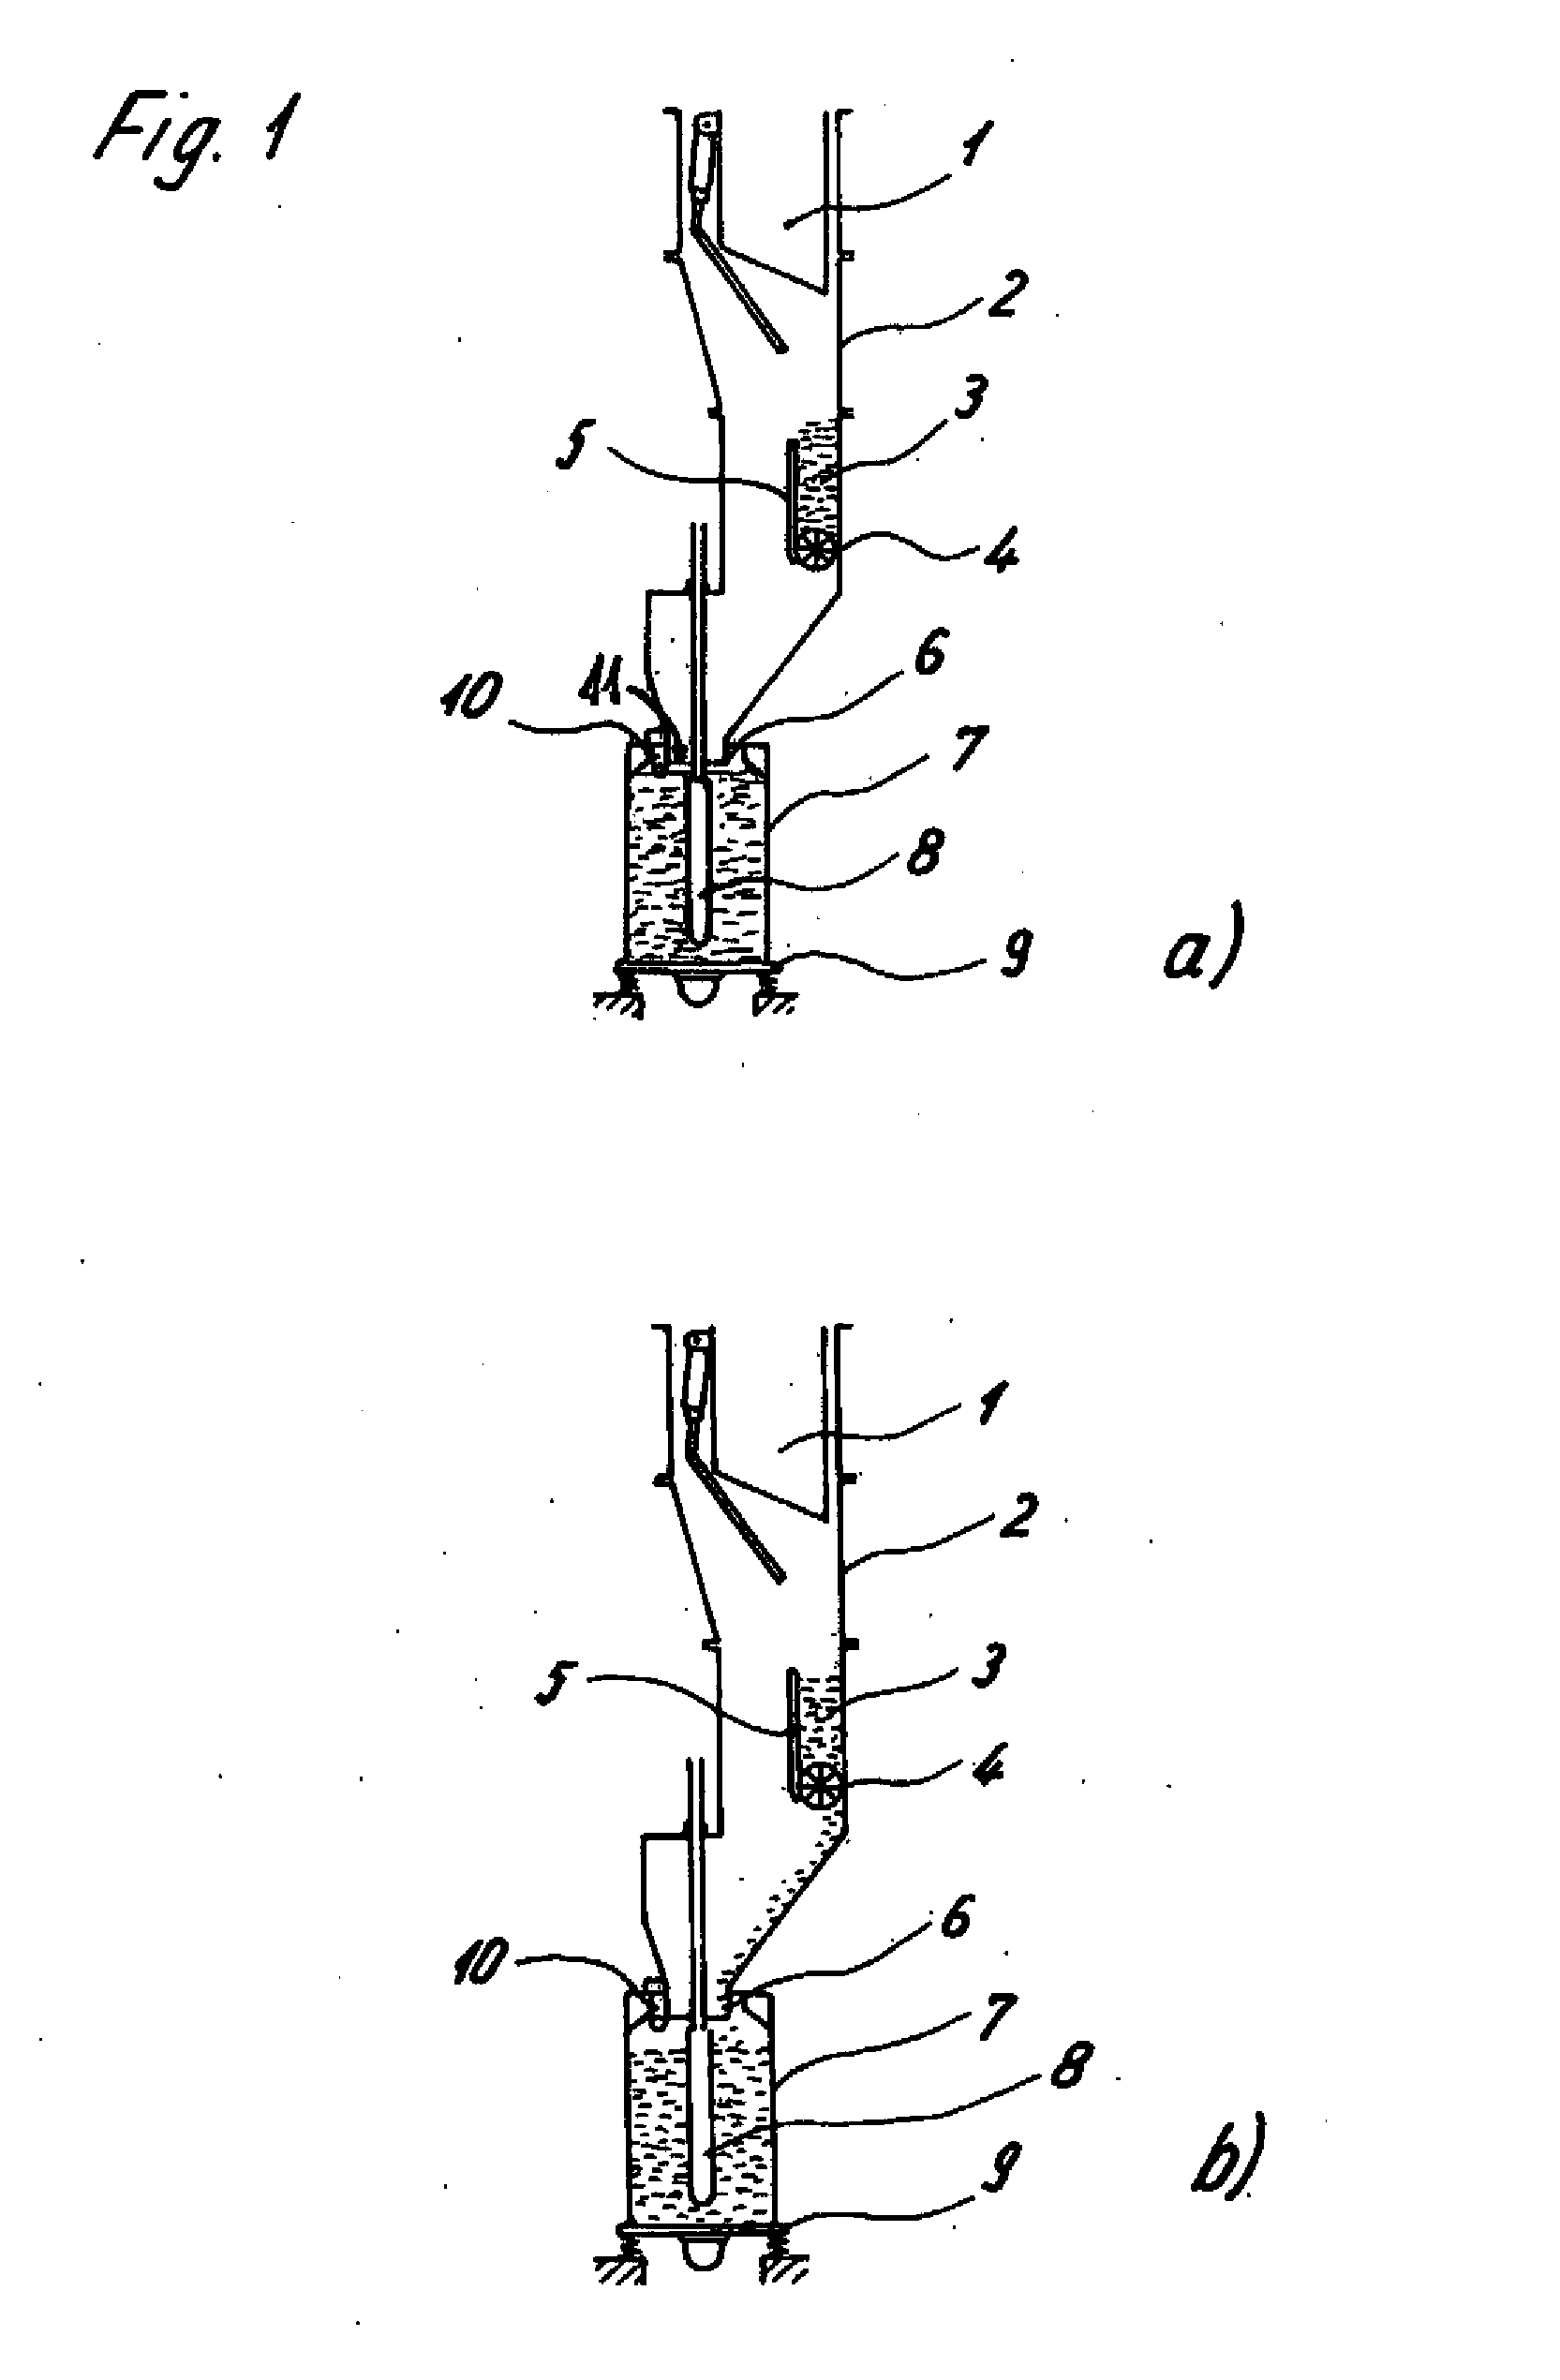 Method and Apparatus for Filling Open Containers with a Powdery Product